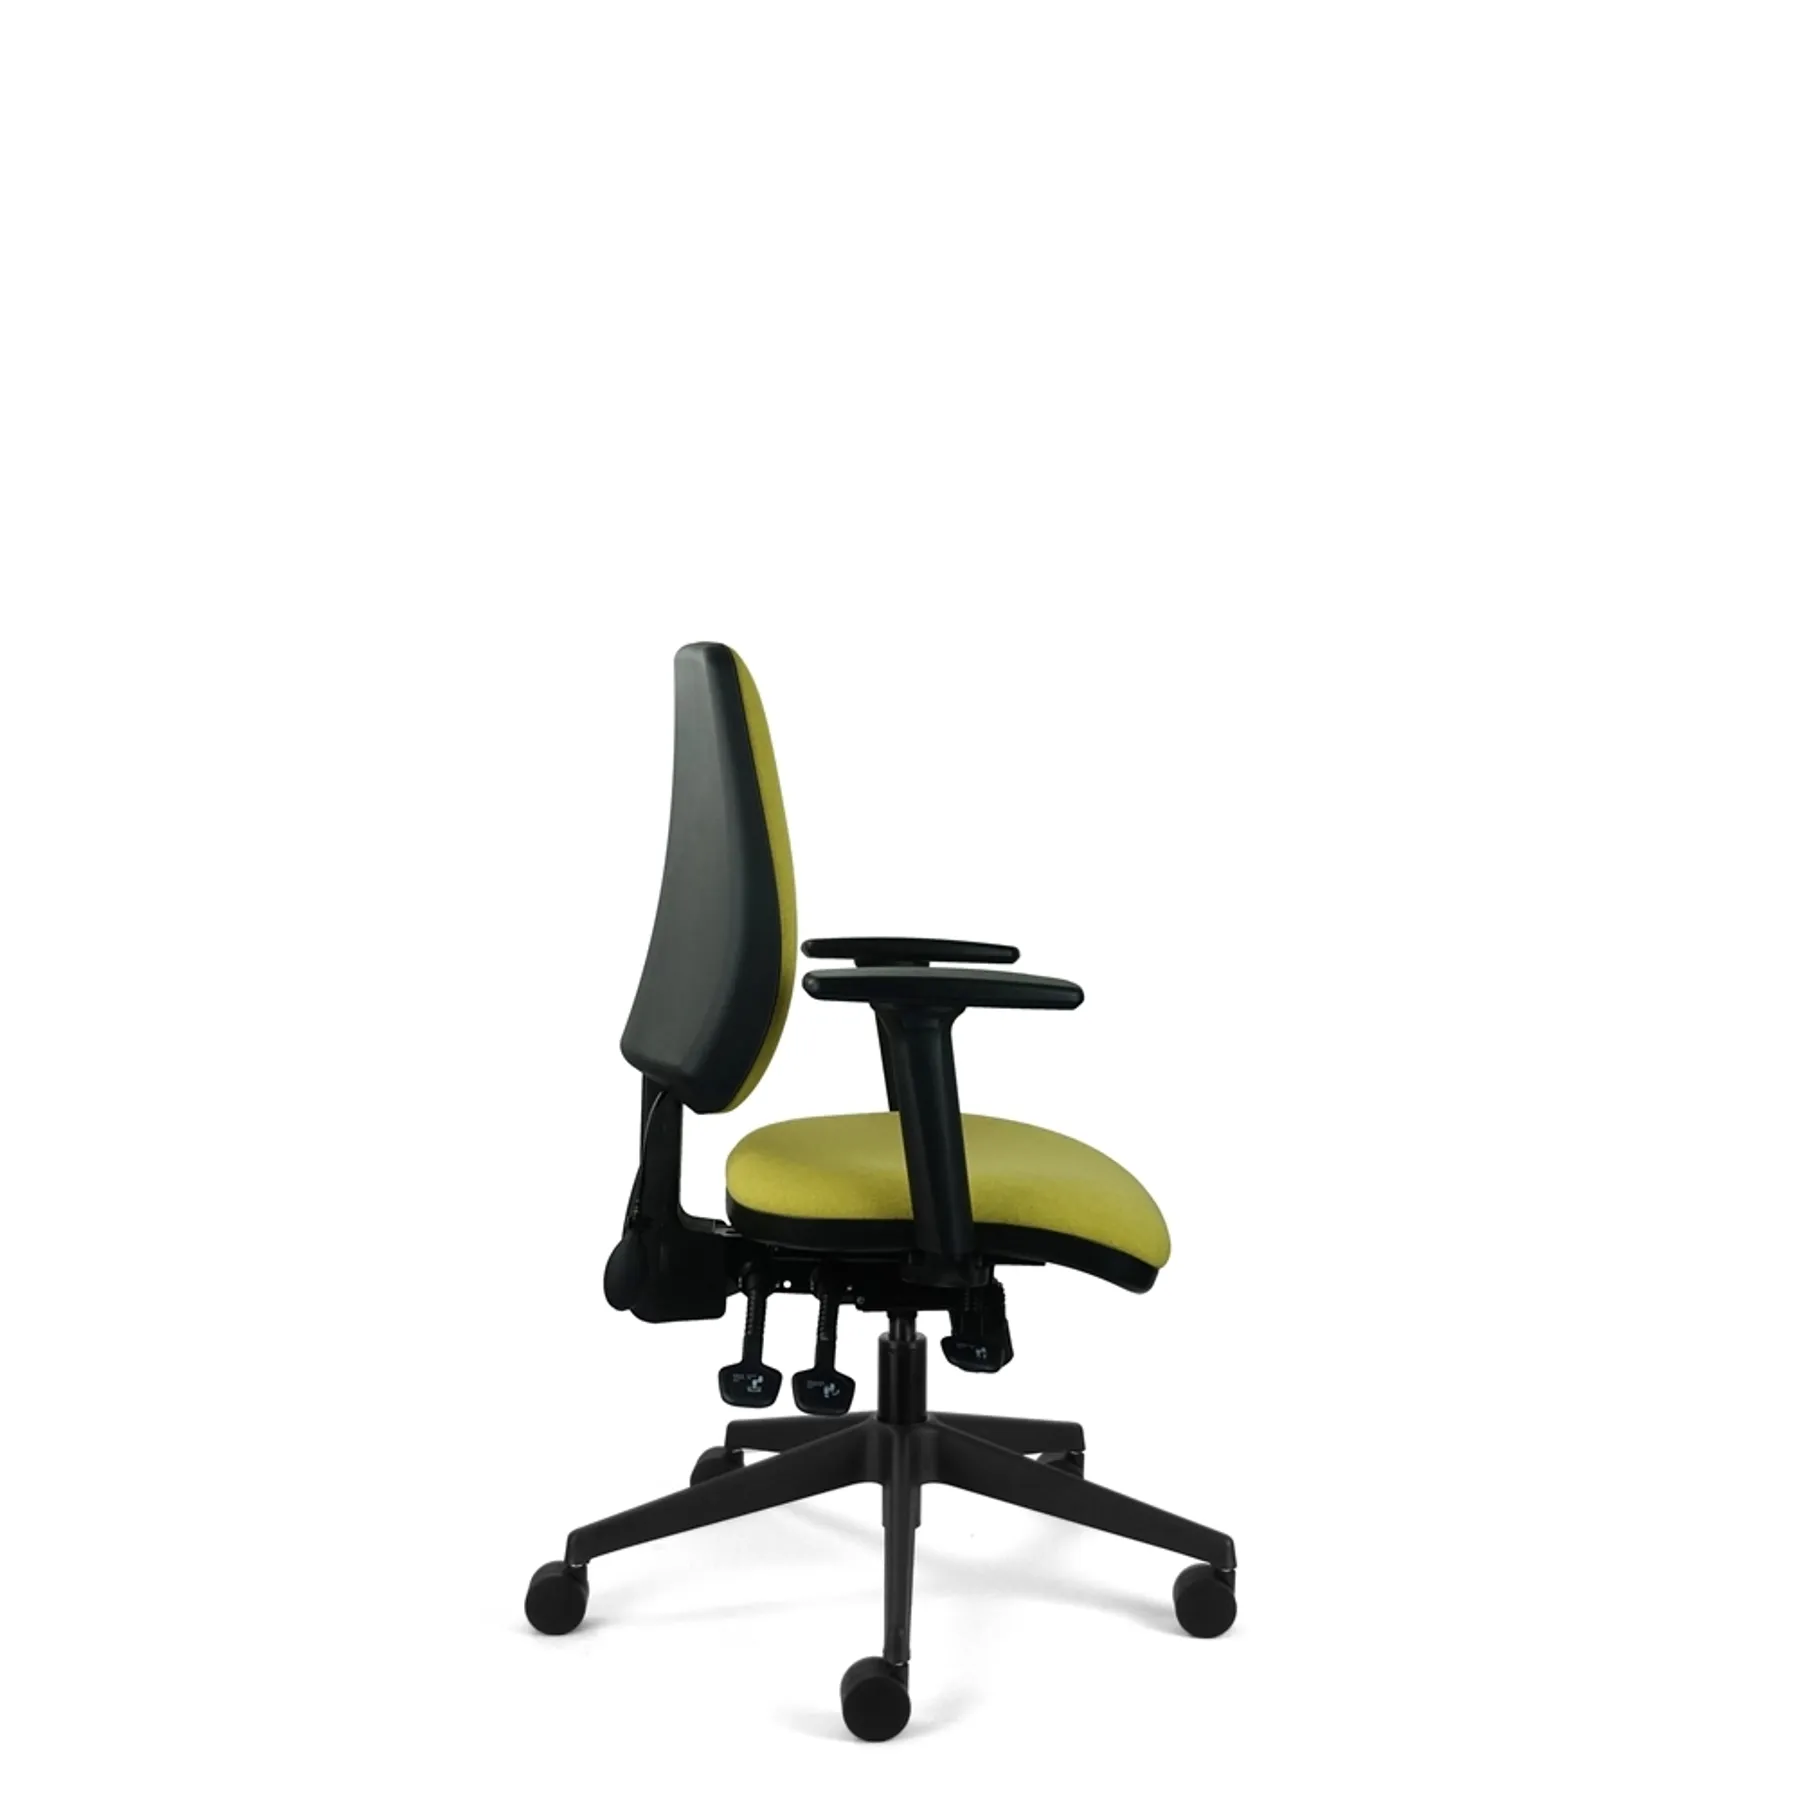 Intro MDK chair side IT100